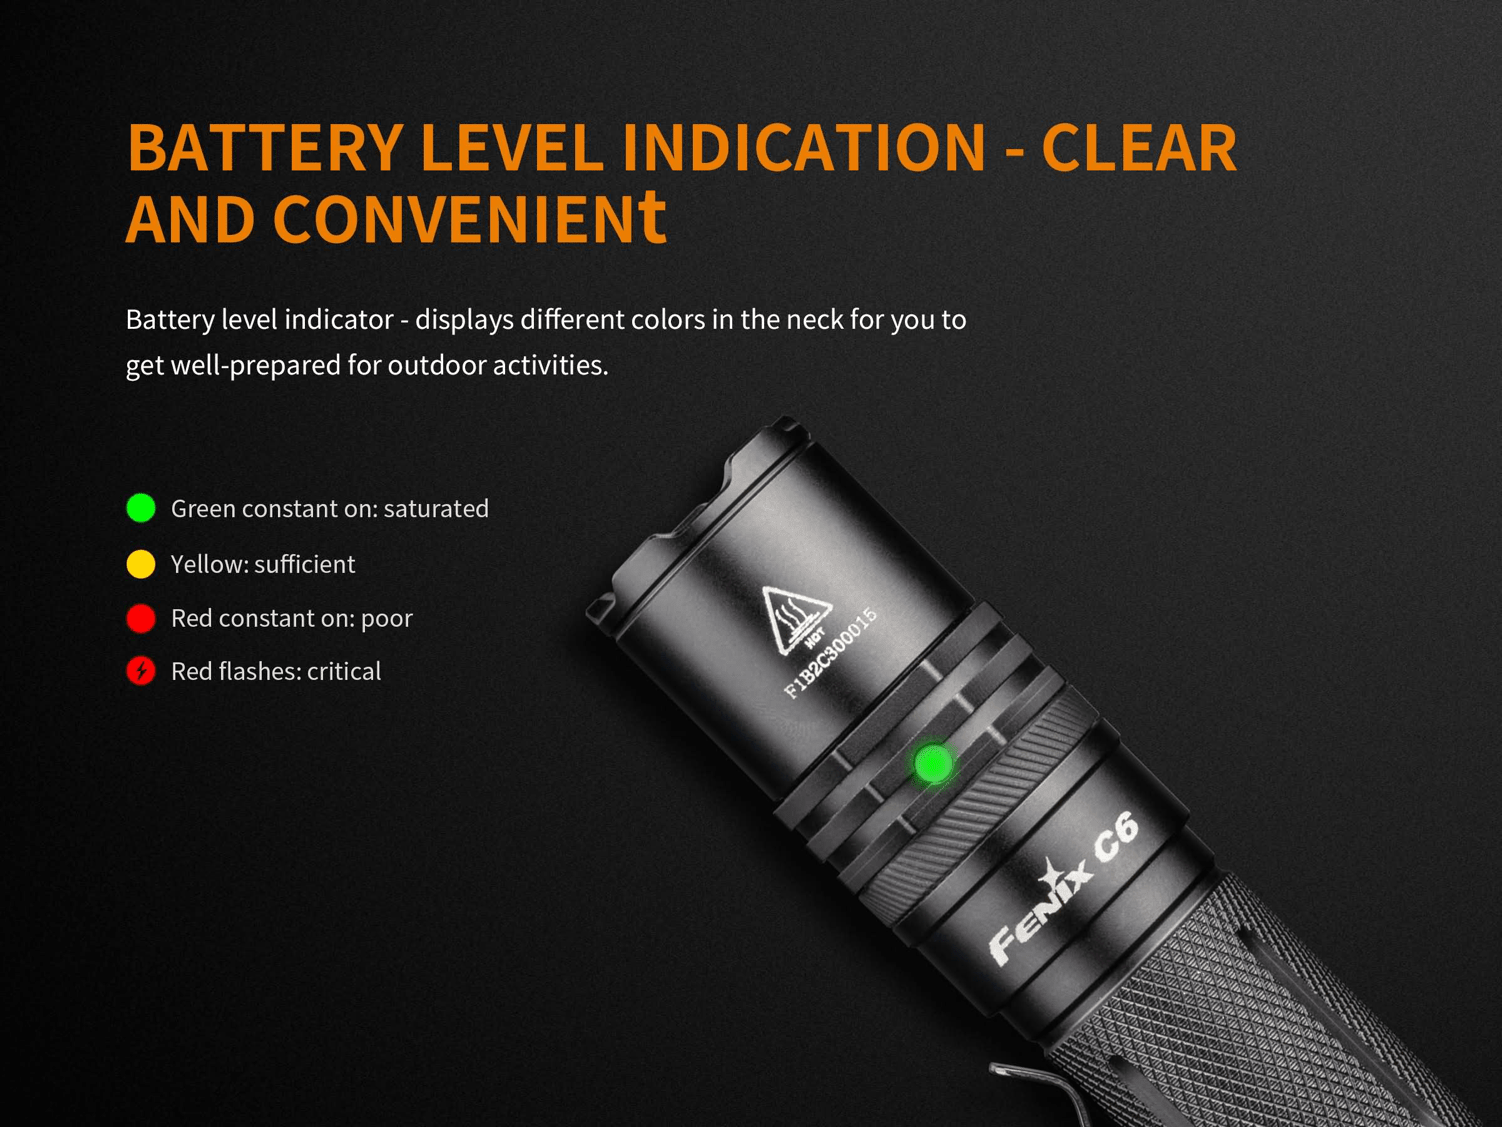 Fenix C6 LED Flashlight in India, 900 Lumens Powerful LED Torch, USB Rechargeable Handheld Light, Powered by Rechargeable Li-ion Battery, Compact, Everyday Carry Work Flashlight, economical Light in India